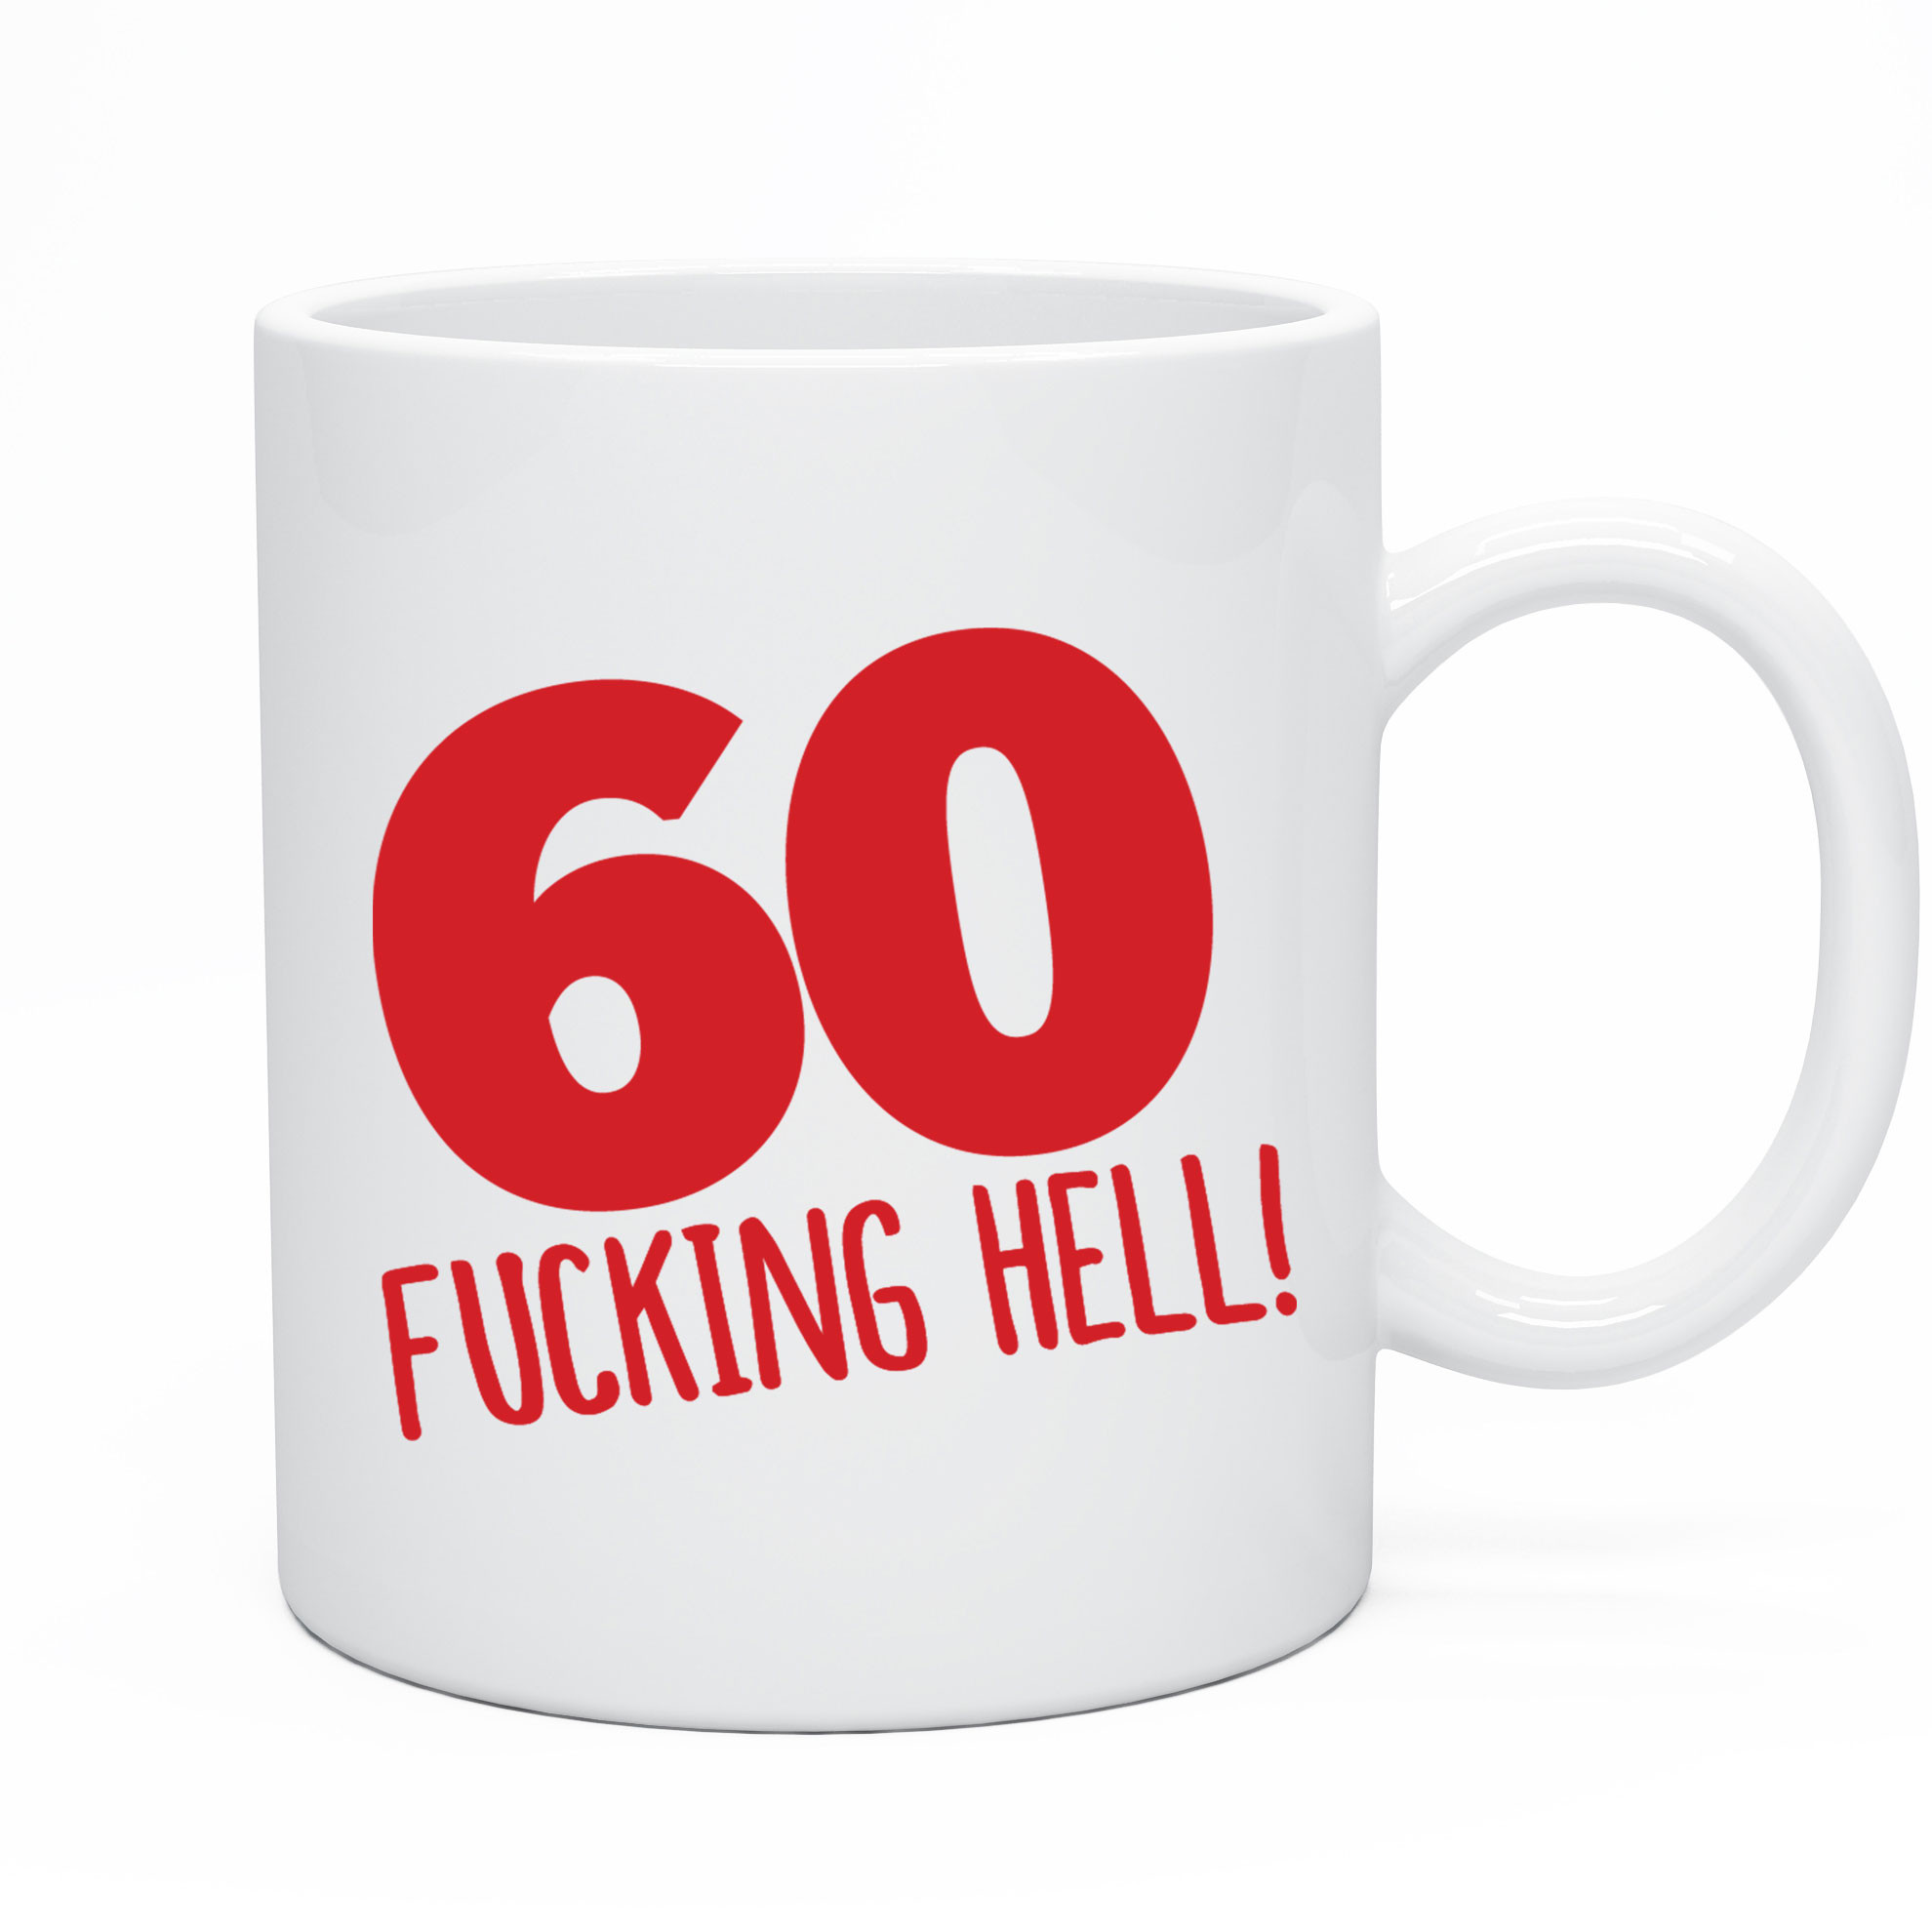 Funny 60th Birthday Gifts
 Funny 60th Birthday Mug Gift Idea Present for 60 today Men